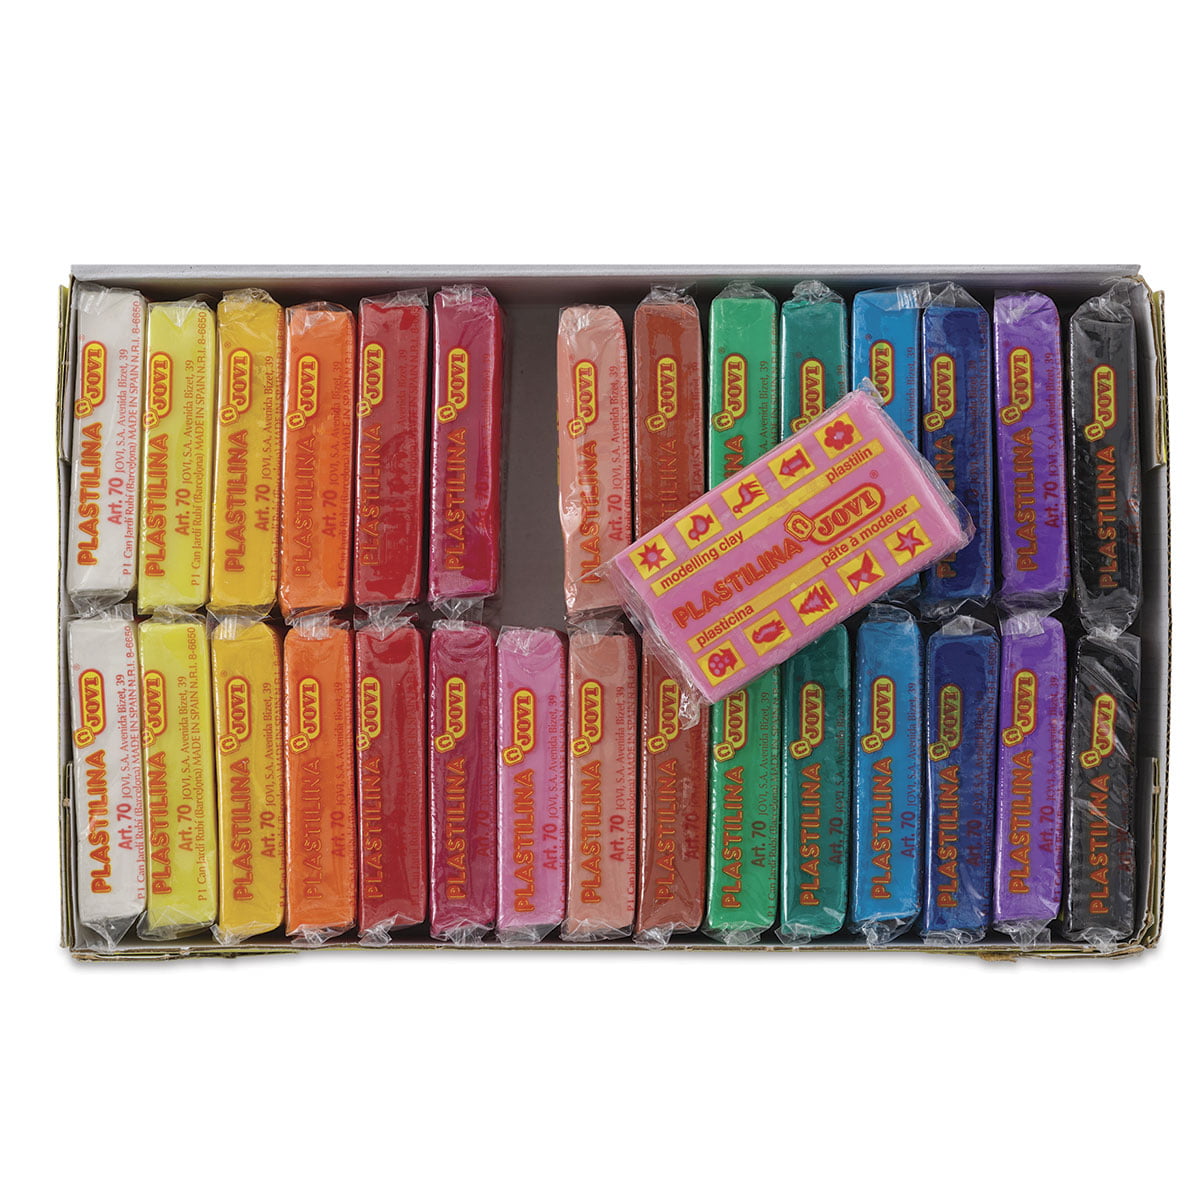 Jovi Plastilina Reusable & Non-Drying Modeling Clay; 1.75 Oz. Bars, Set of  30, 5 Each of 6 Pastel Colors, Perfect for Arts & Crafts Projects